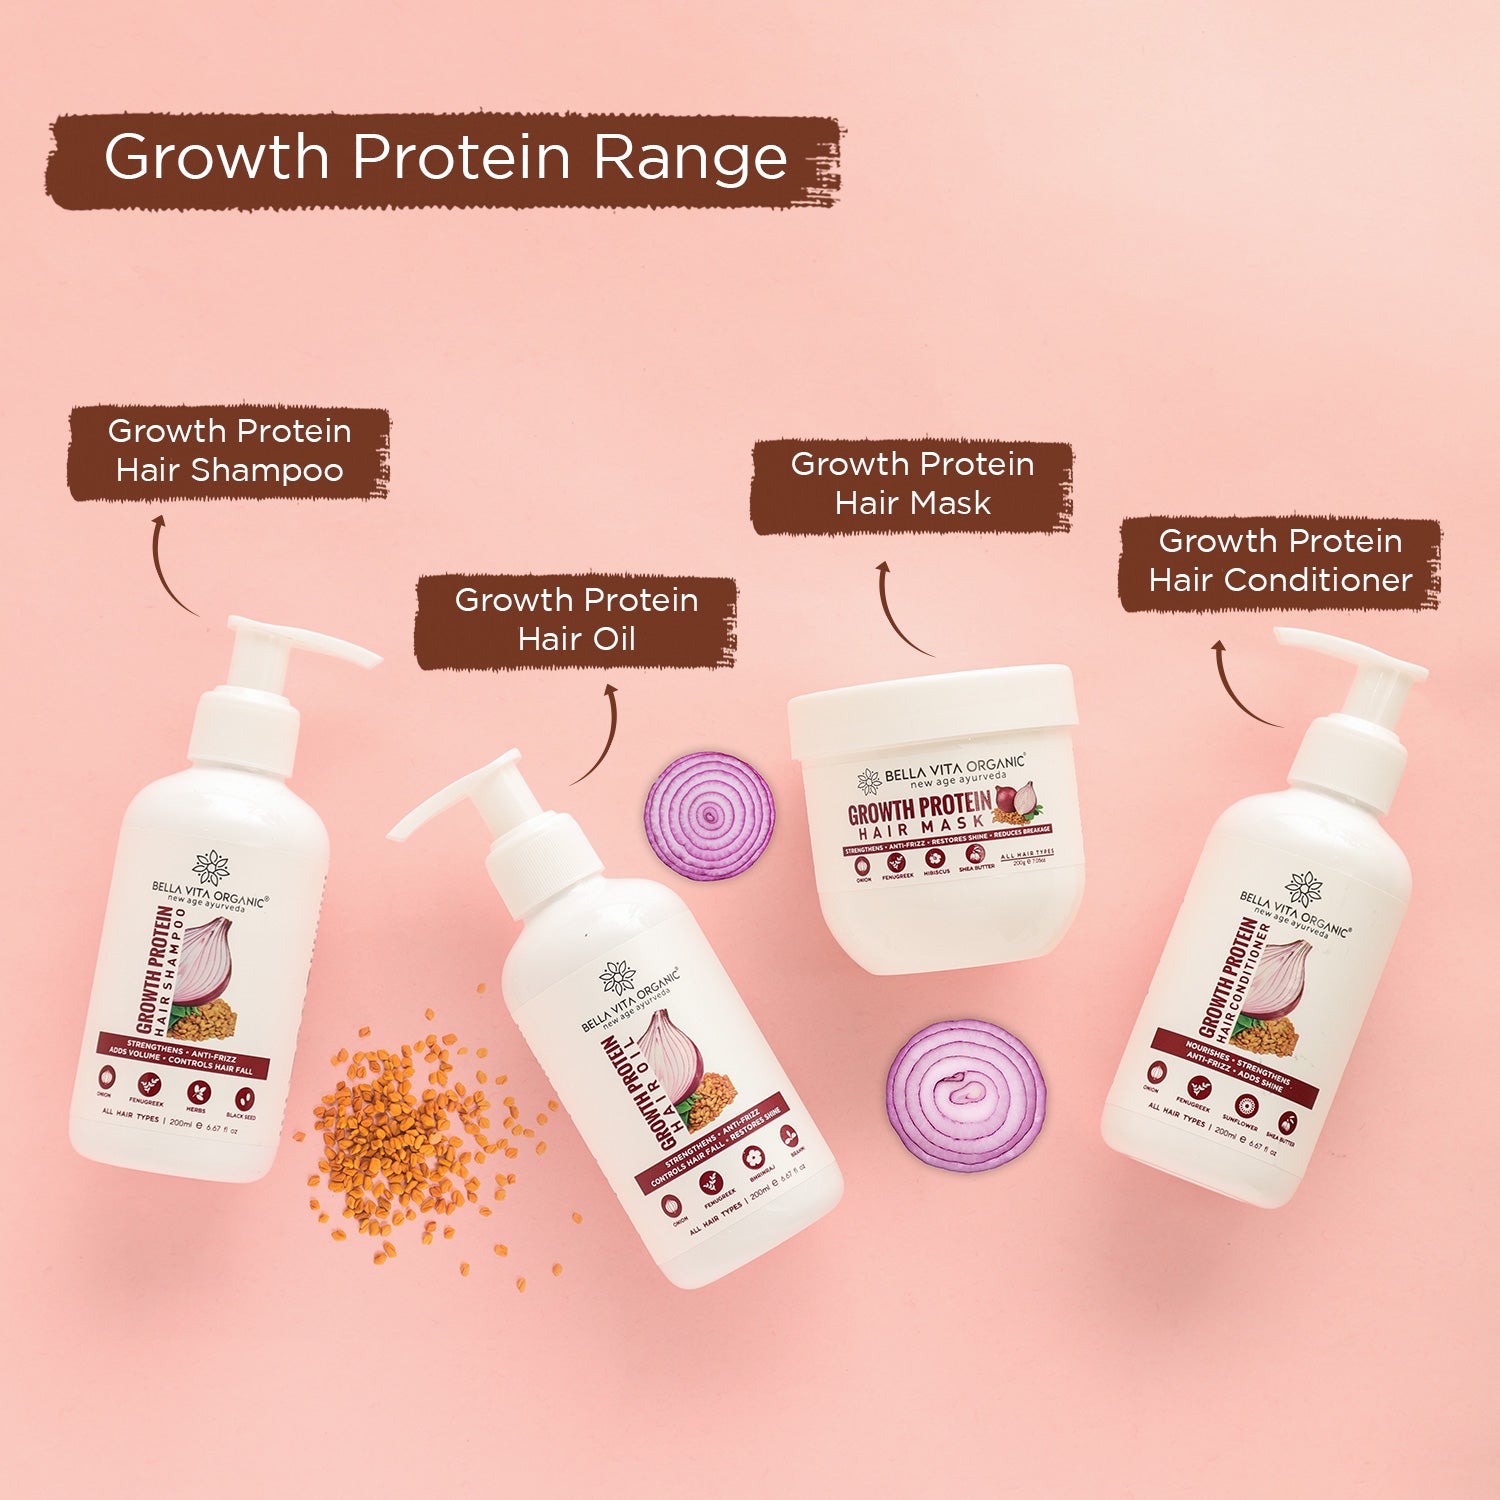 Growth Protein Hair Conditioner - 200ml